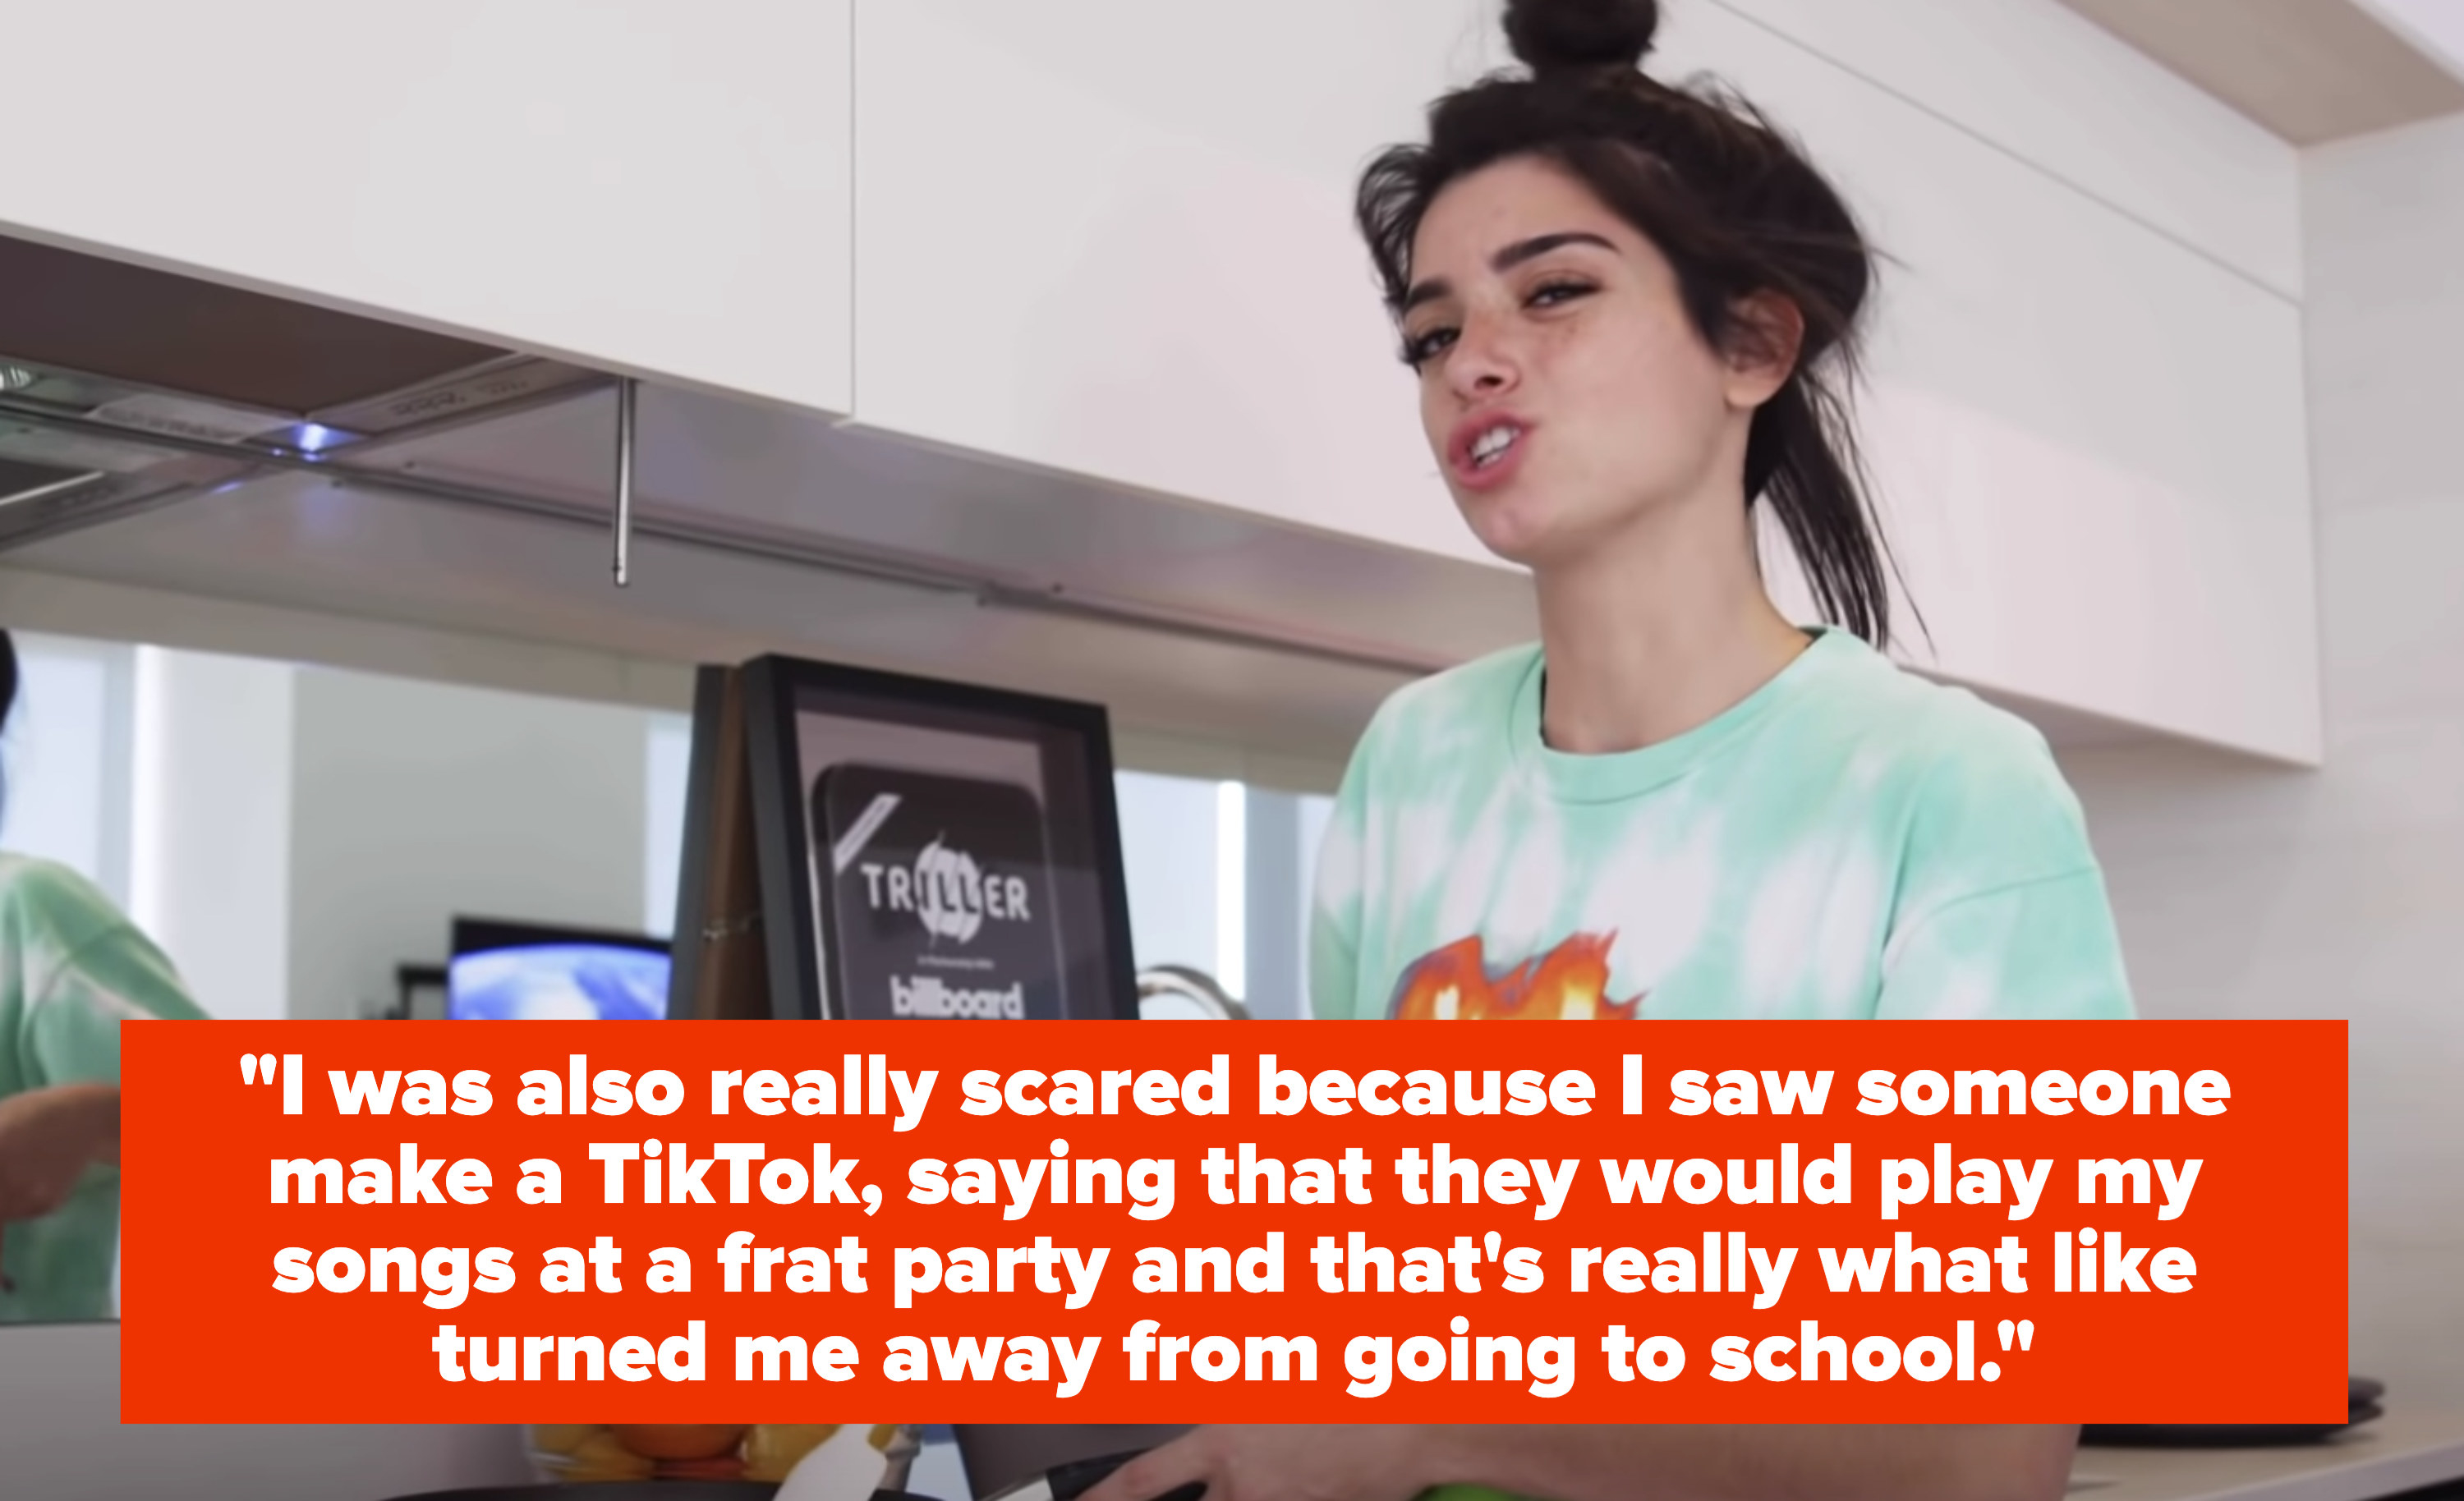 Dixie saying &quot;&quot;I was also really scared because I saw someone make a TikTok, saying that they would play my songs at a frat party. That&#x27;s really what like turned me away from going to school&quot;